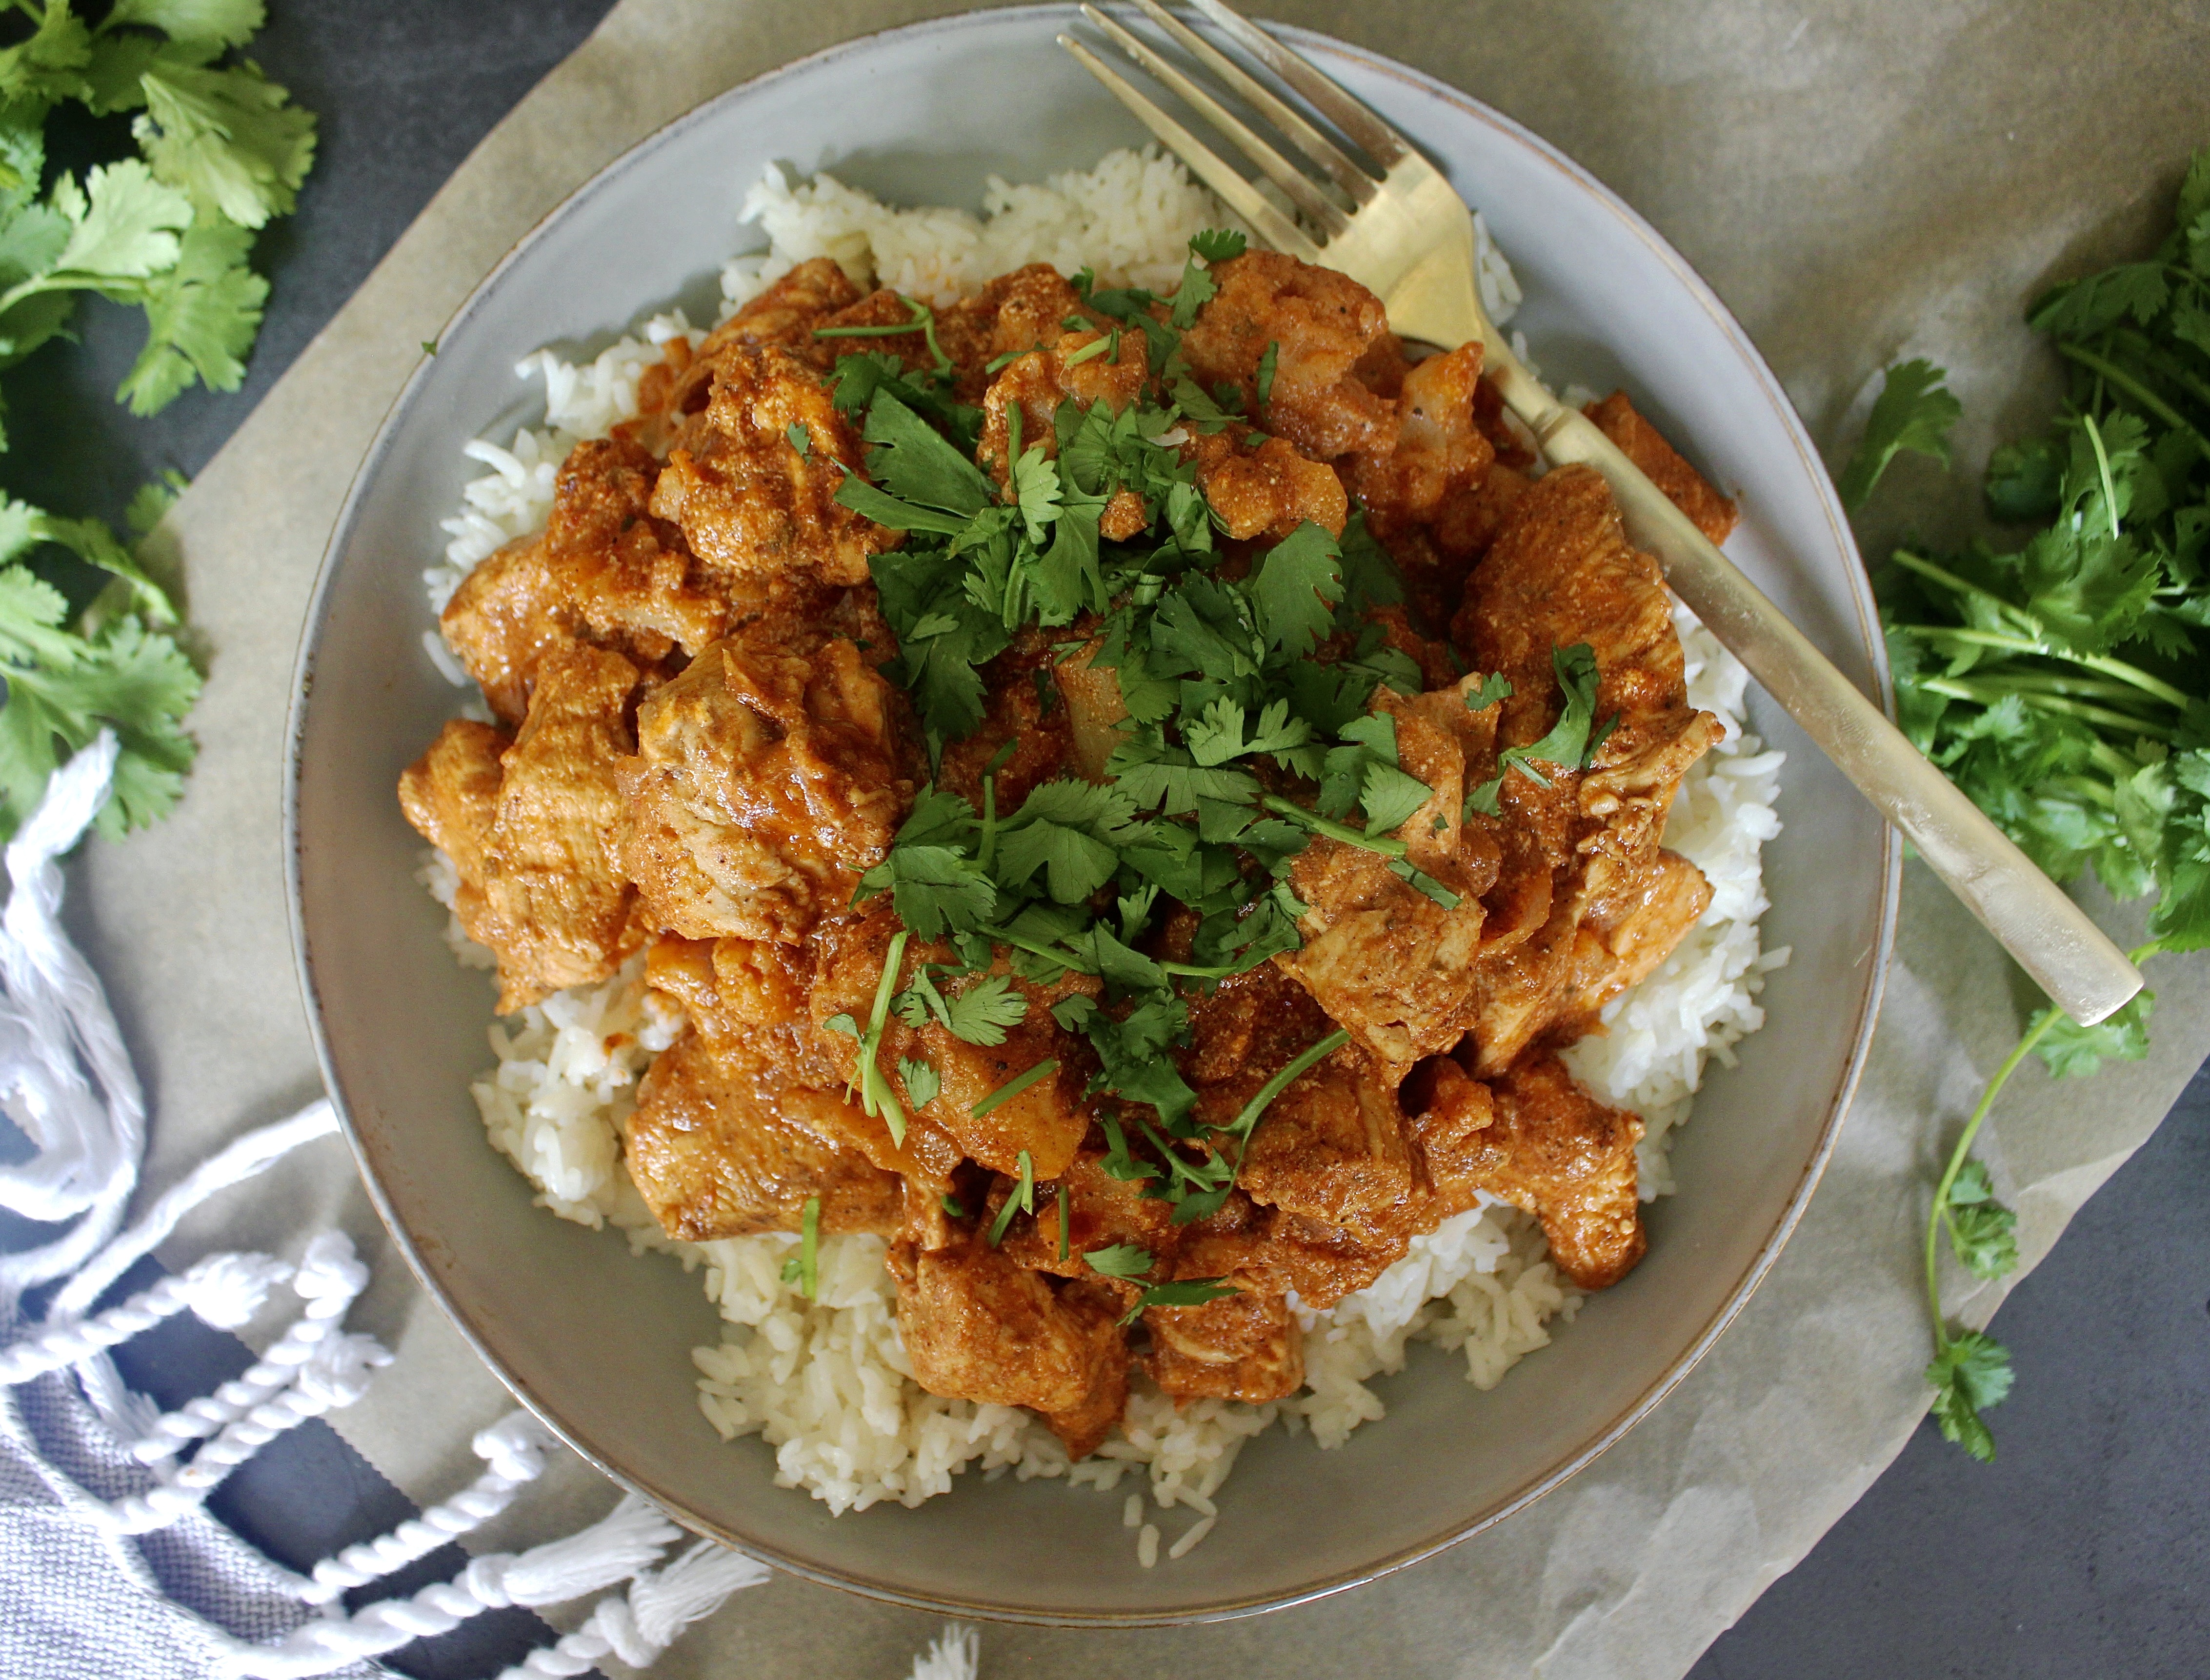 Super saucy, a tad spicy, and packed with all the cozy flavors of Indian cuisine, this Healthy Indian Spiced Chicken and Cauliflower is lightened up comfort food at its best!